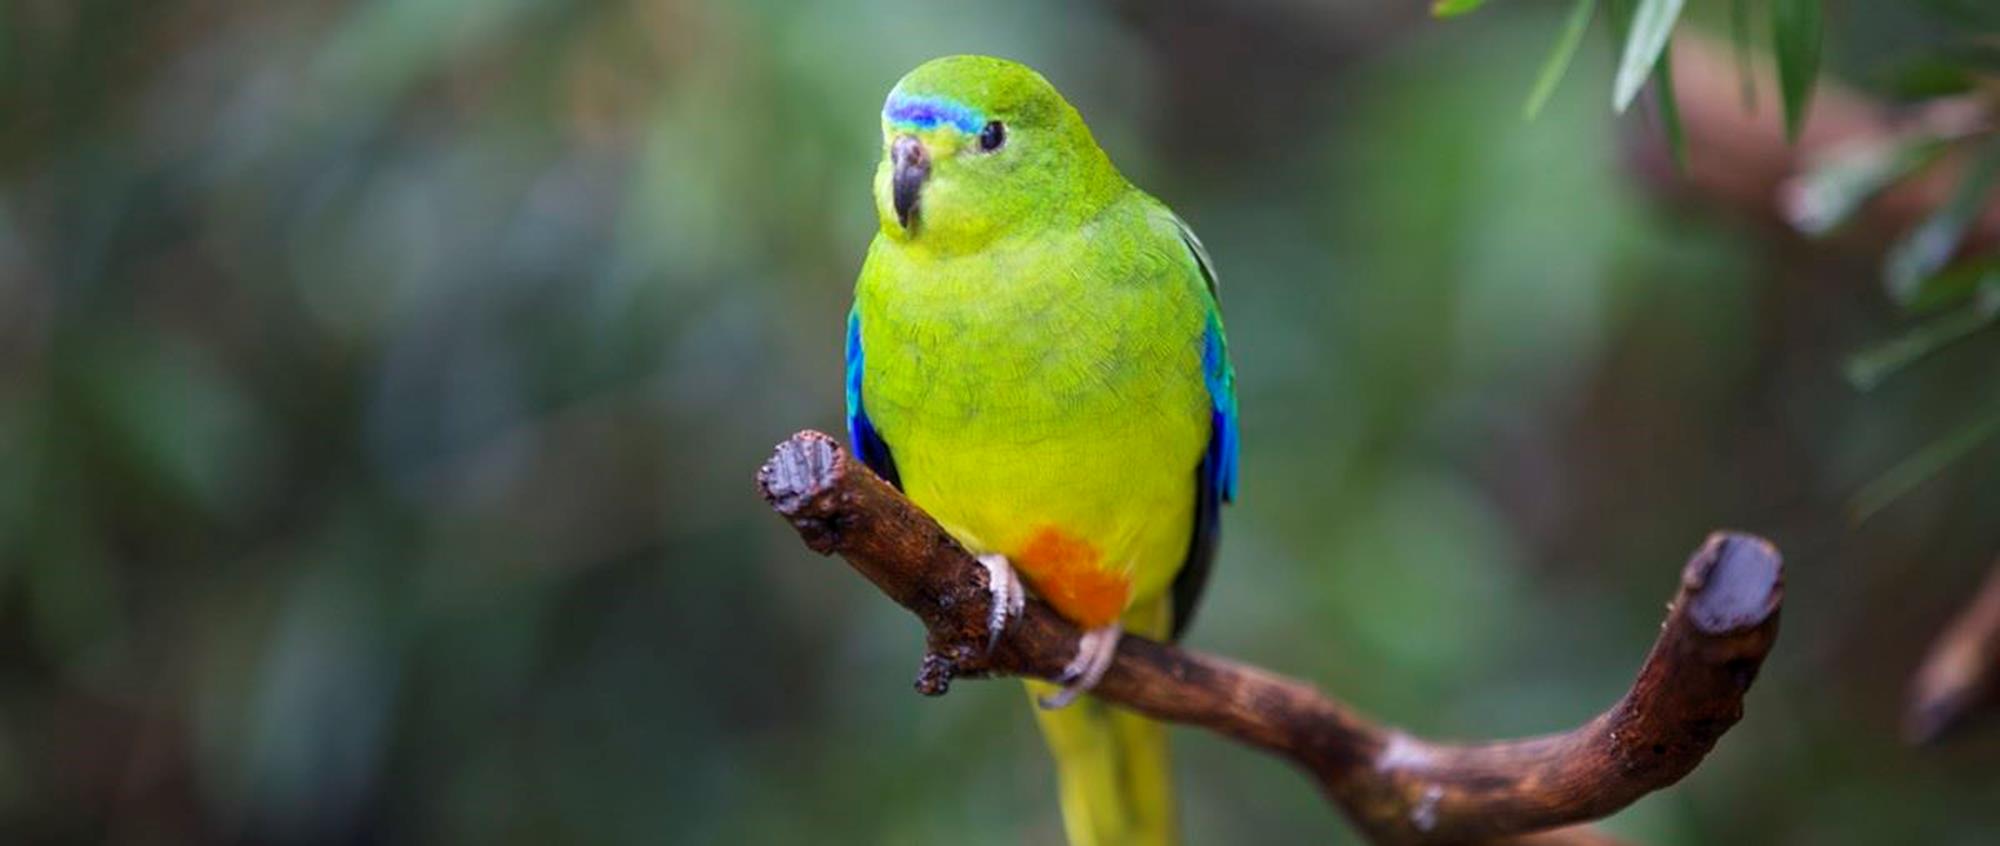 Orange Bellied Parrot sitting a tree branch. They are mostly coloured bright grass-green with areas of blue and yellow and as the name suggests, an orange belly.